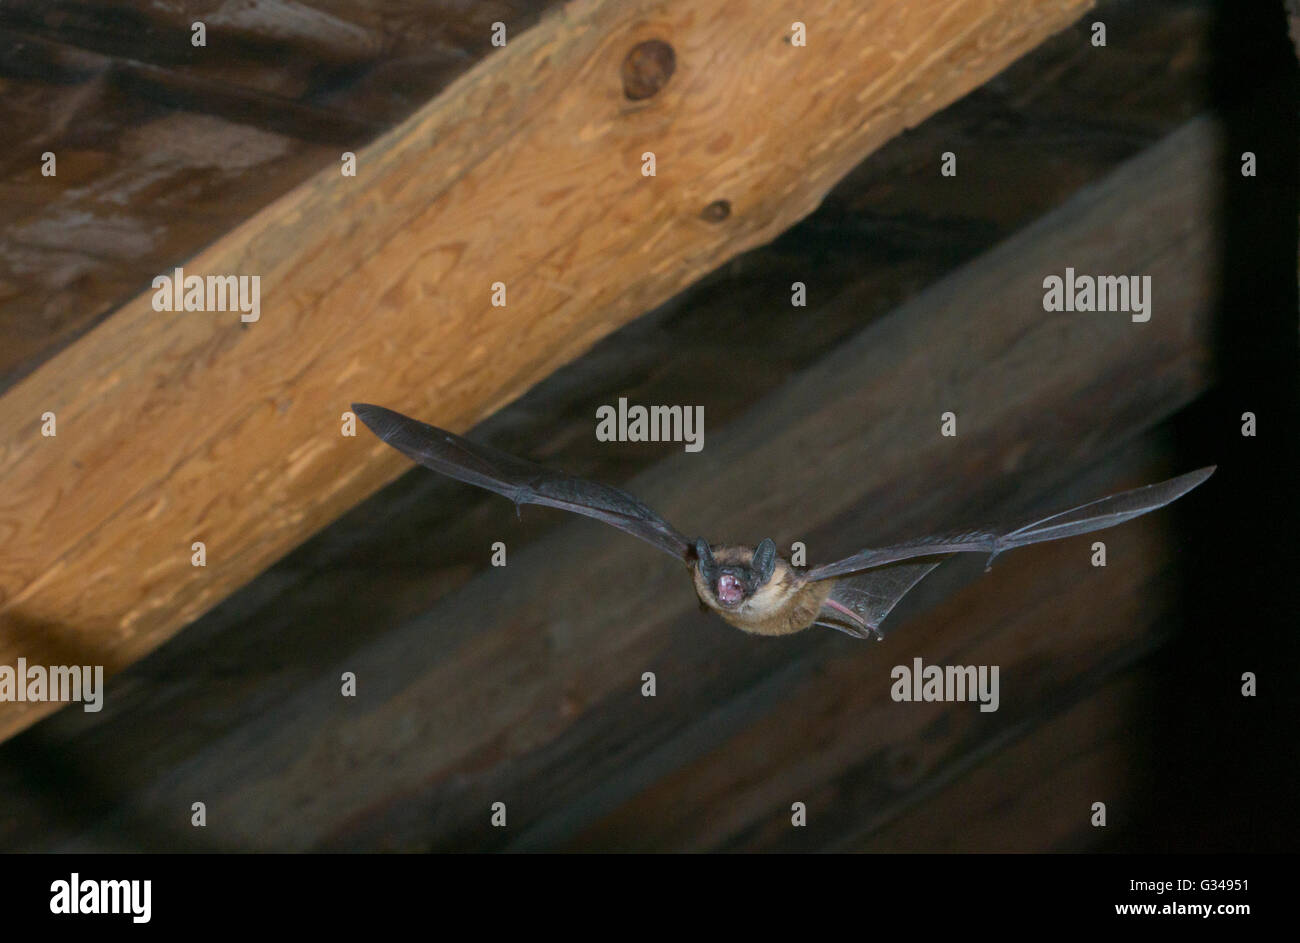 Northern Bat ( Vespertilio nilssoni) flying for insects in the attic of a house with chimney stack Stock Photo